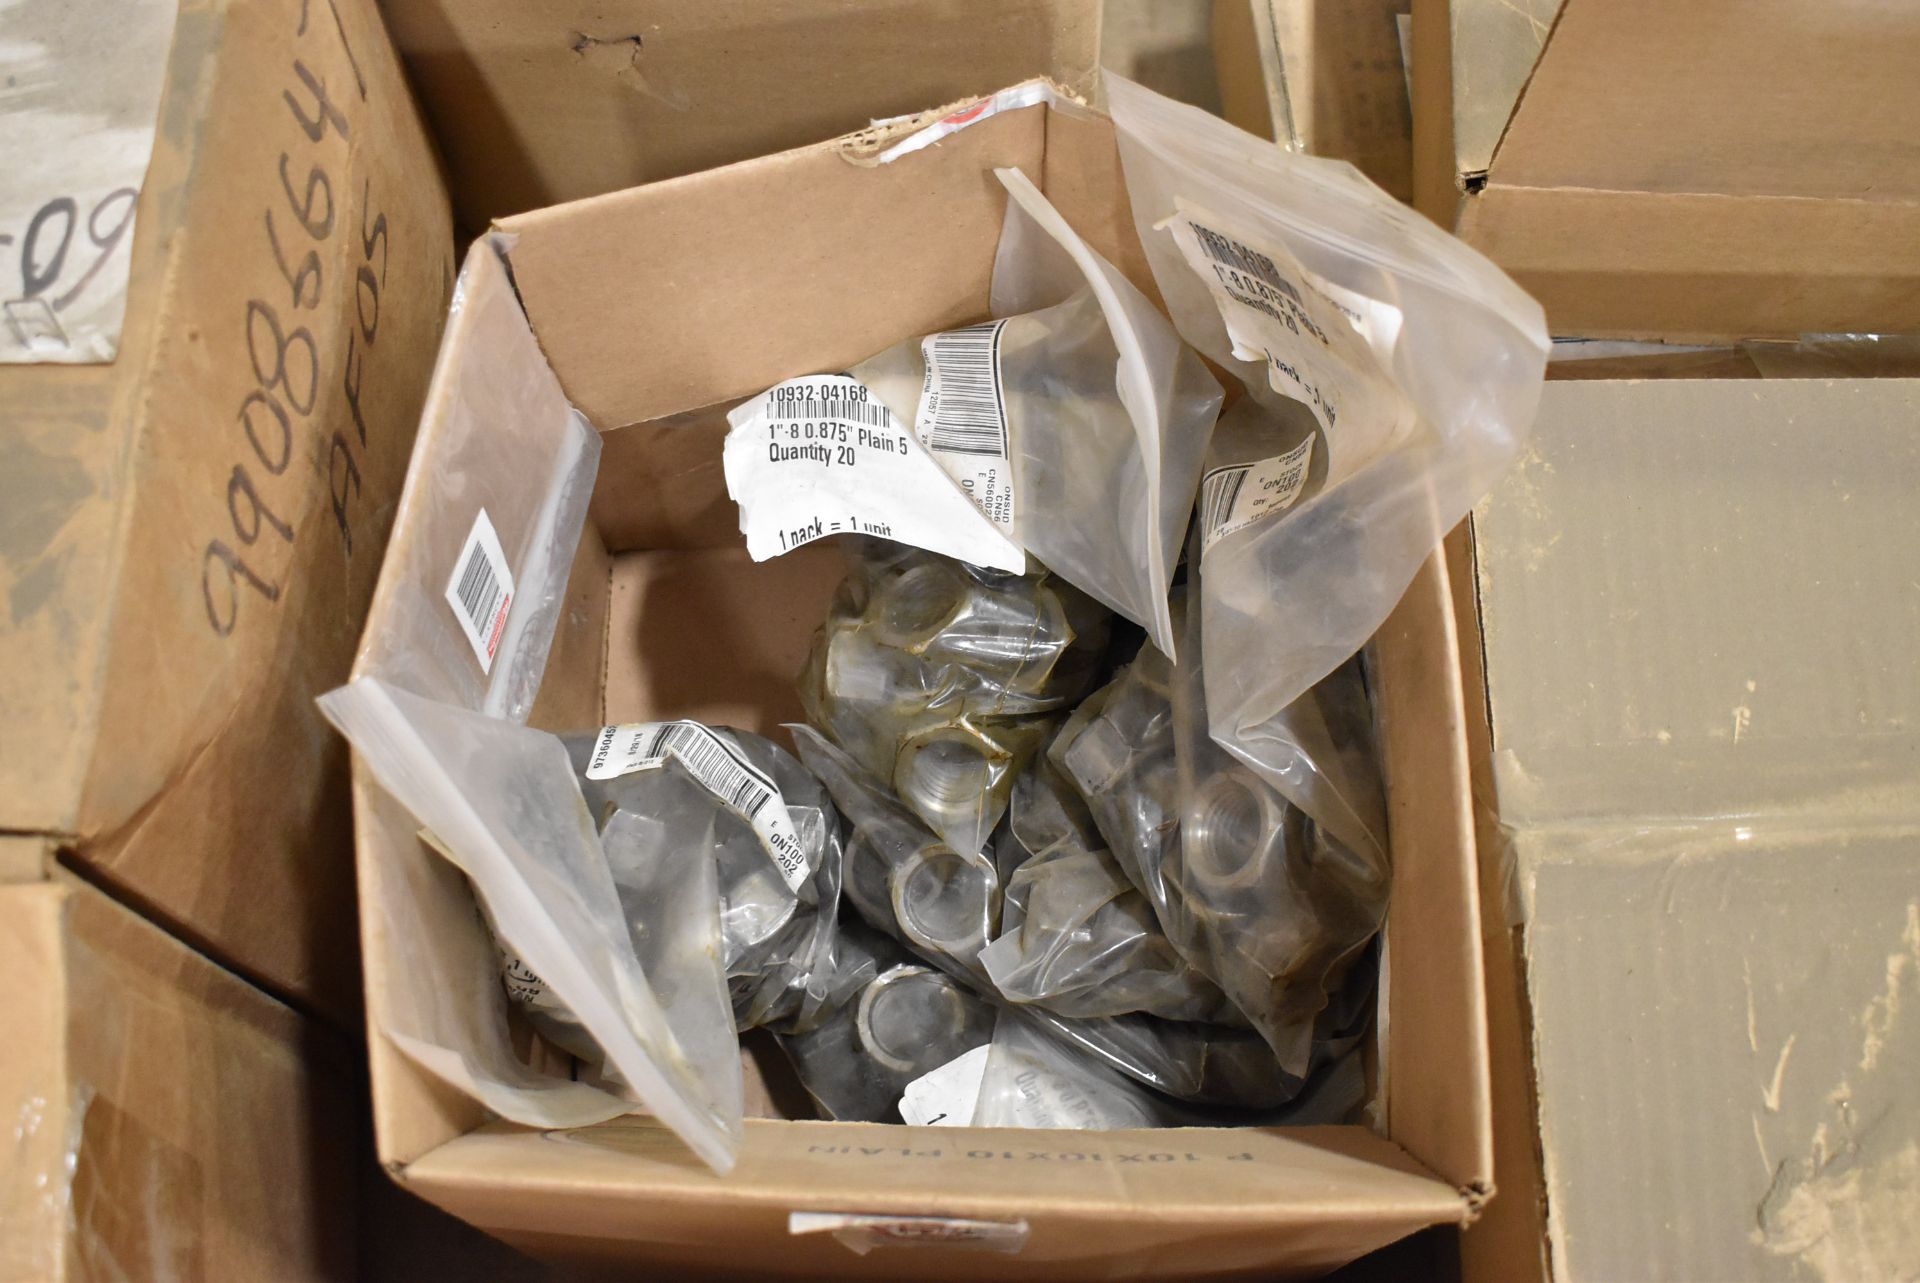 LOT/ SKID WITH ABS BUSHINGS, HARDWARE, BAGS (CMD WAREHOUSE) [CMD-059-22S] - Image 3 of 7